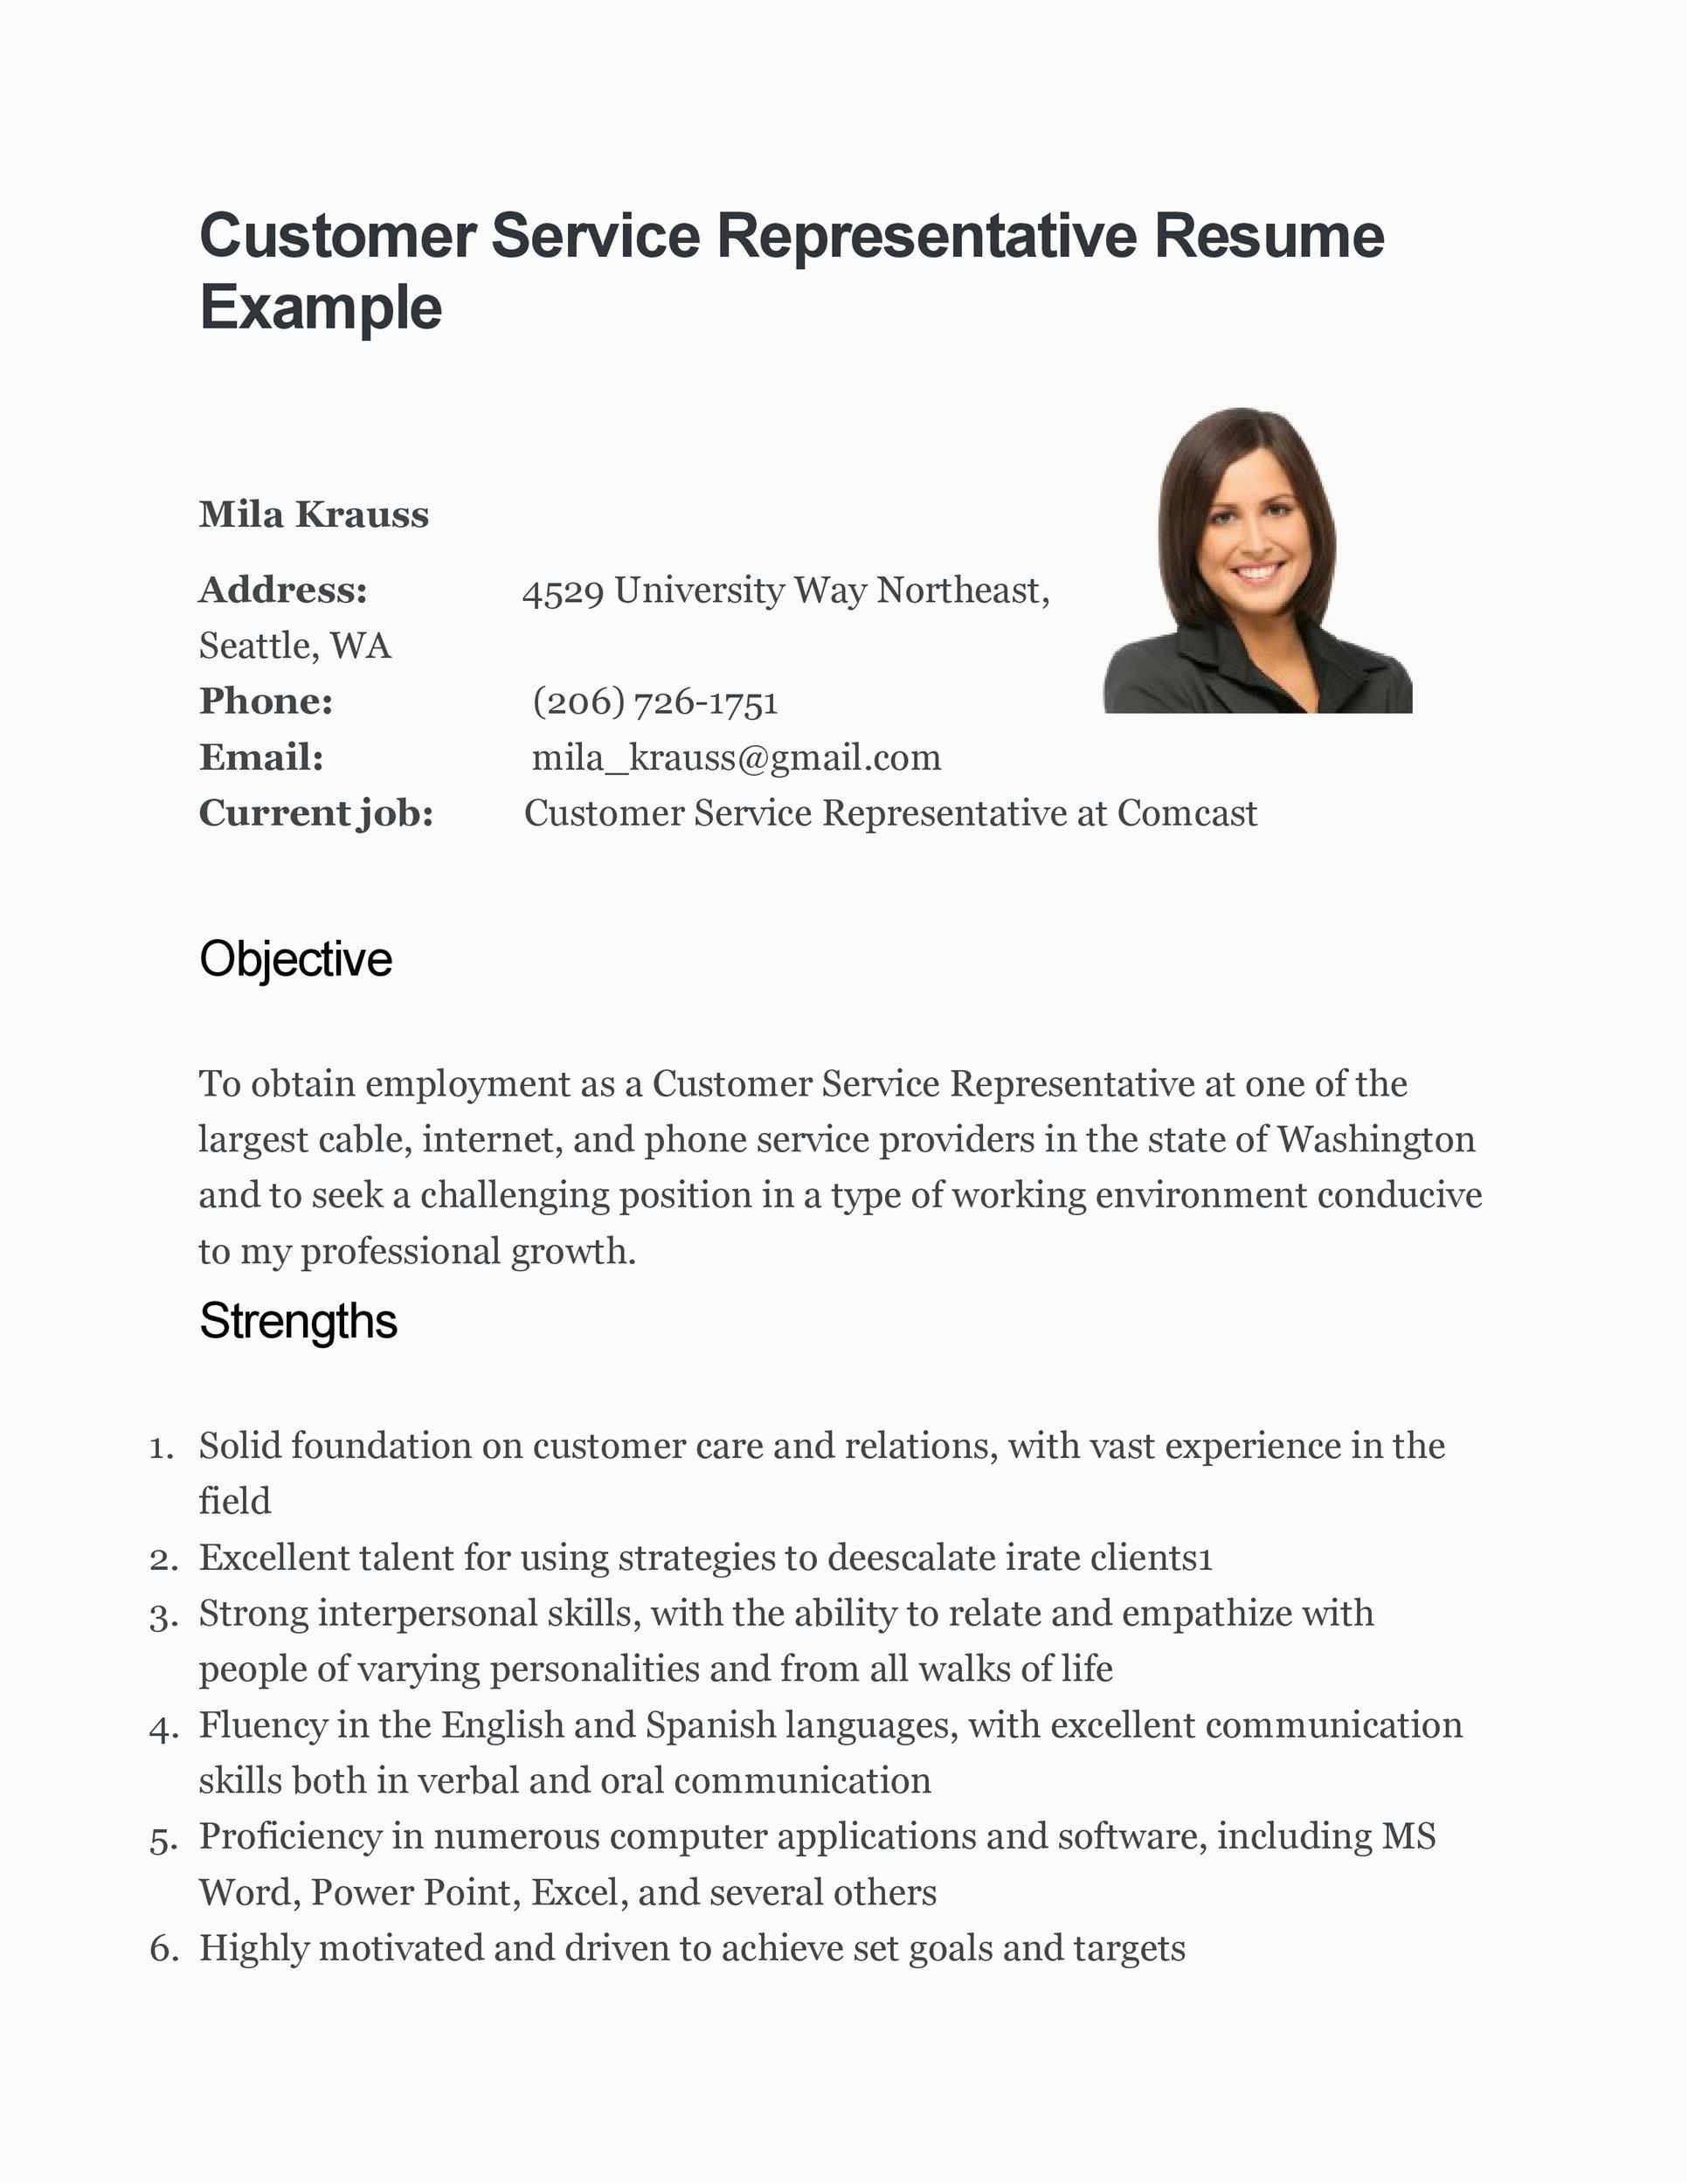 Free Resume Templates for Customer Service Jobs 30 Customer Service Resume Examples Templatelab